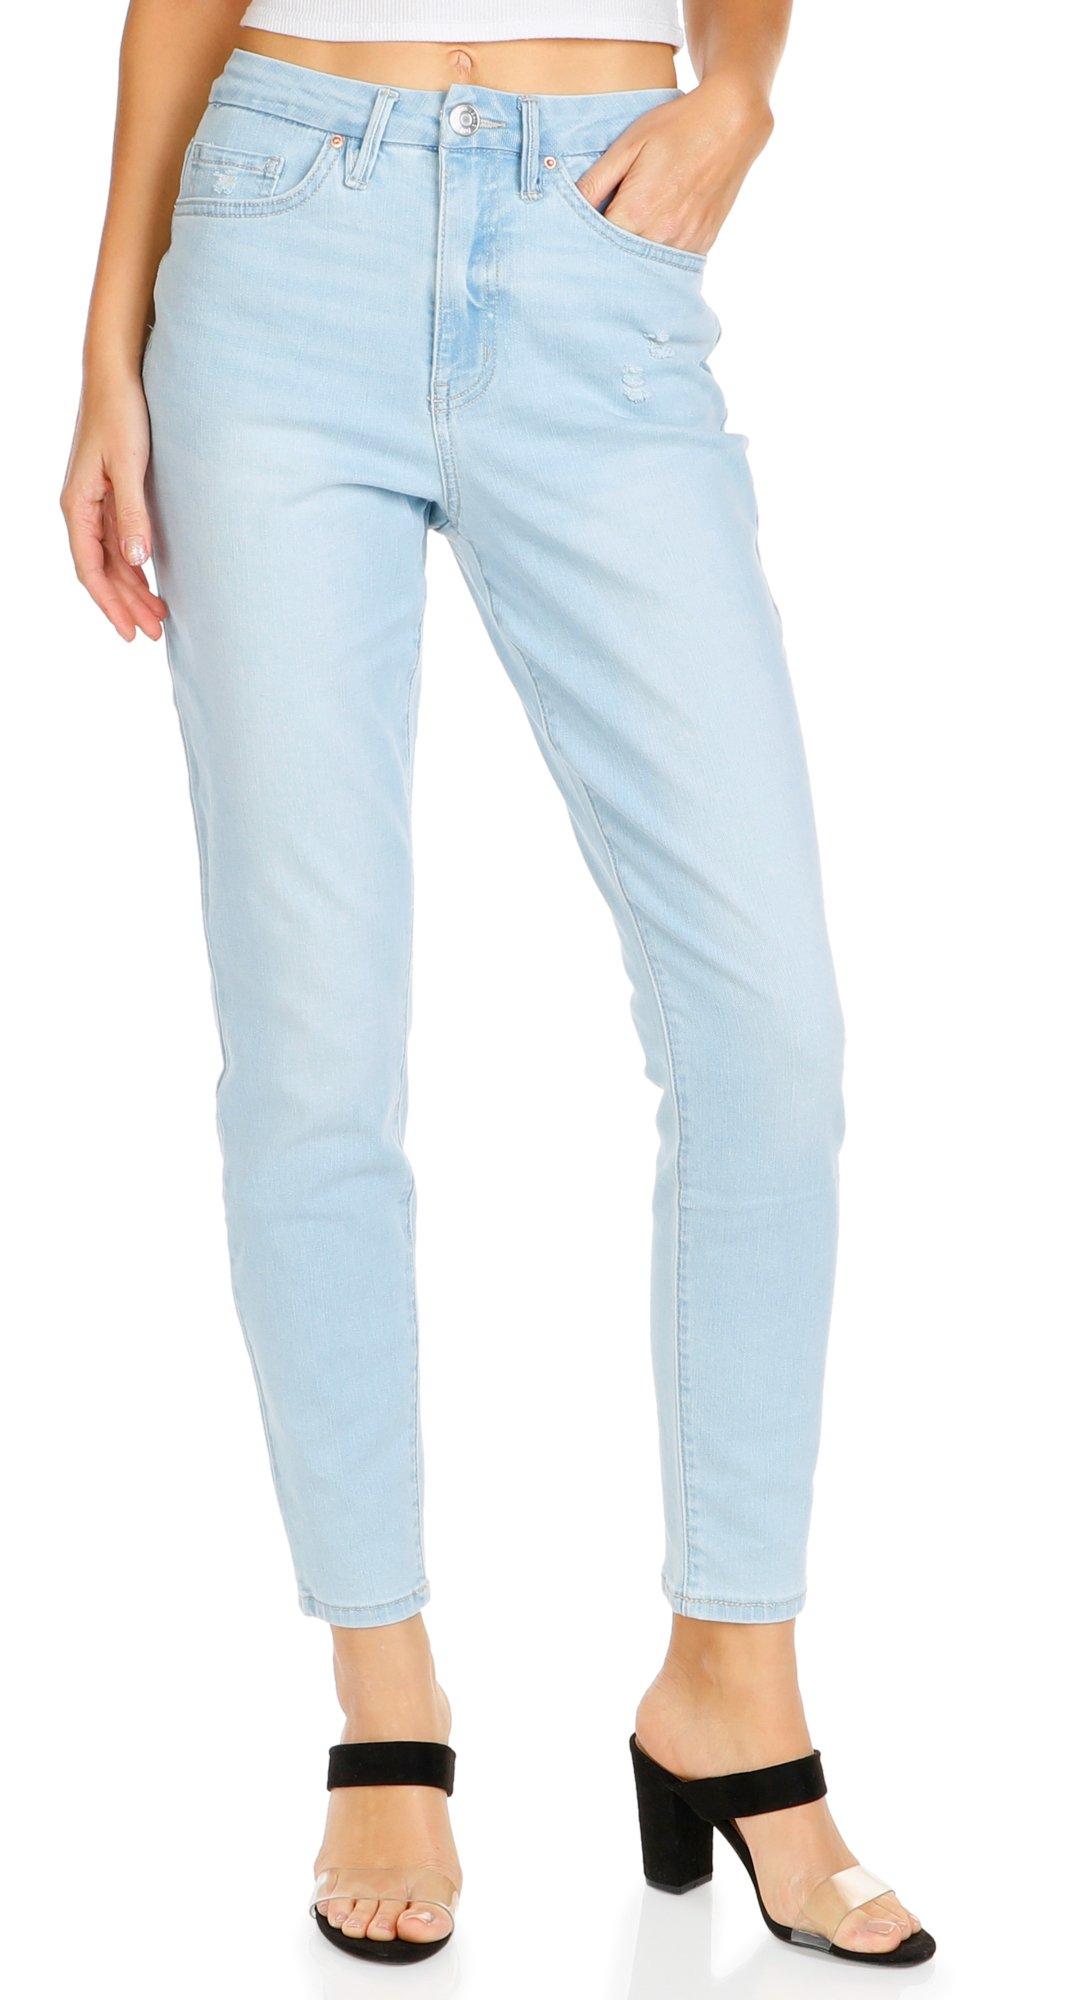 Juniors Ultra High Waisted Skinny Jeans